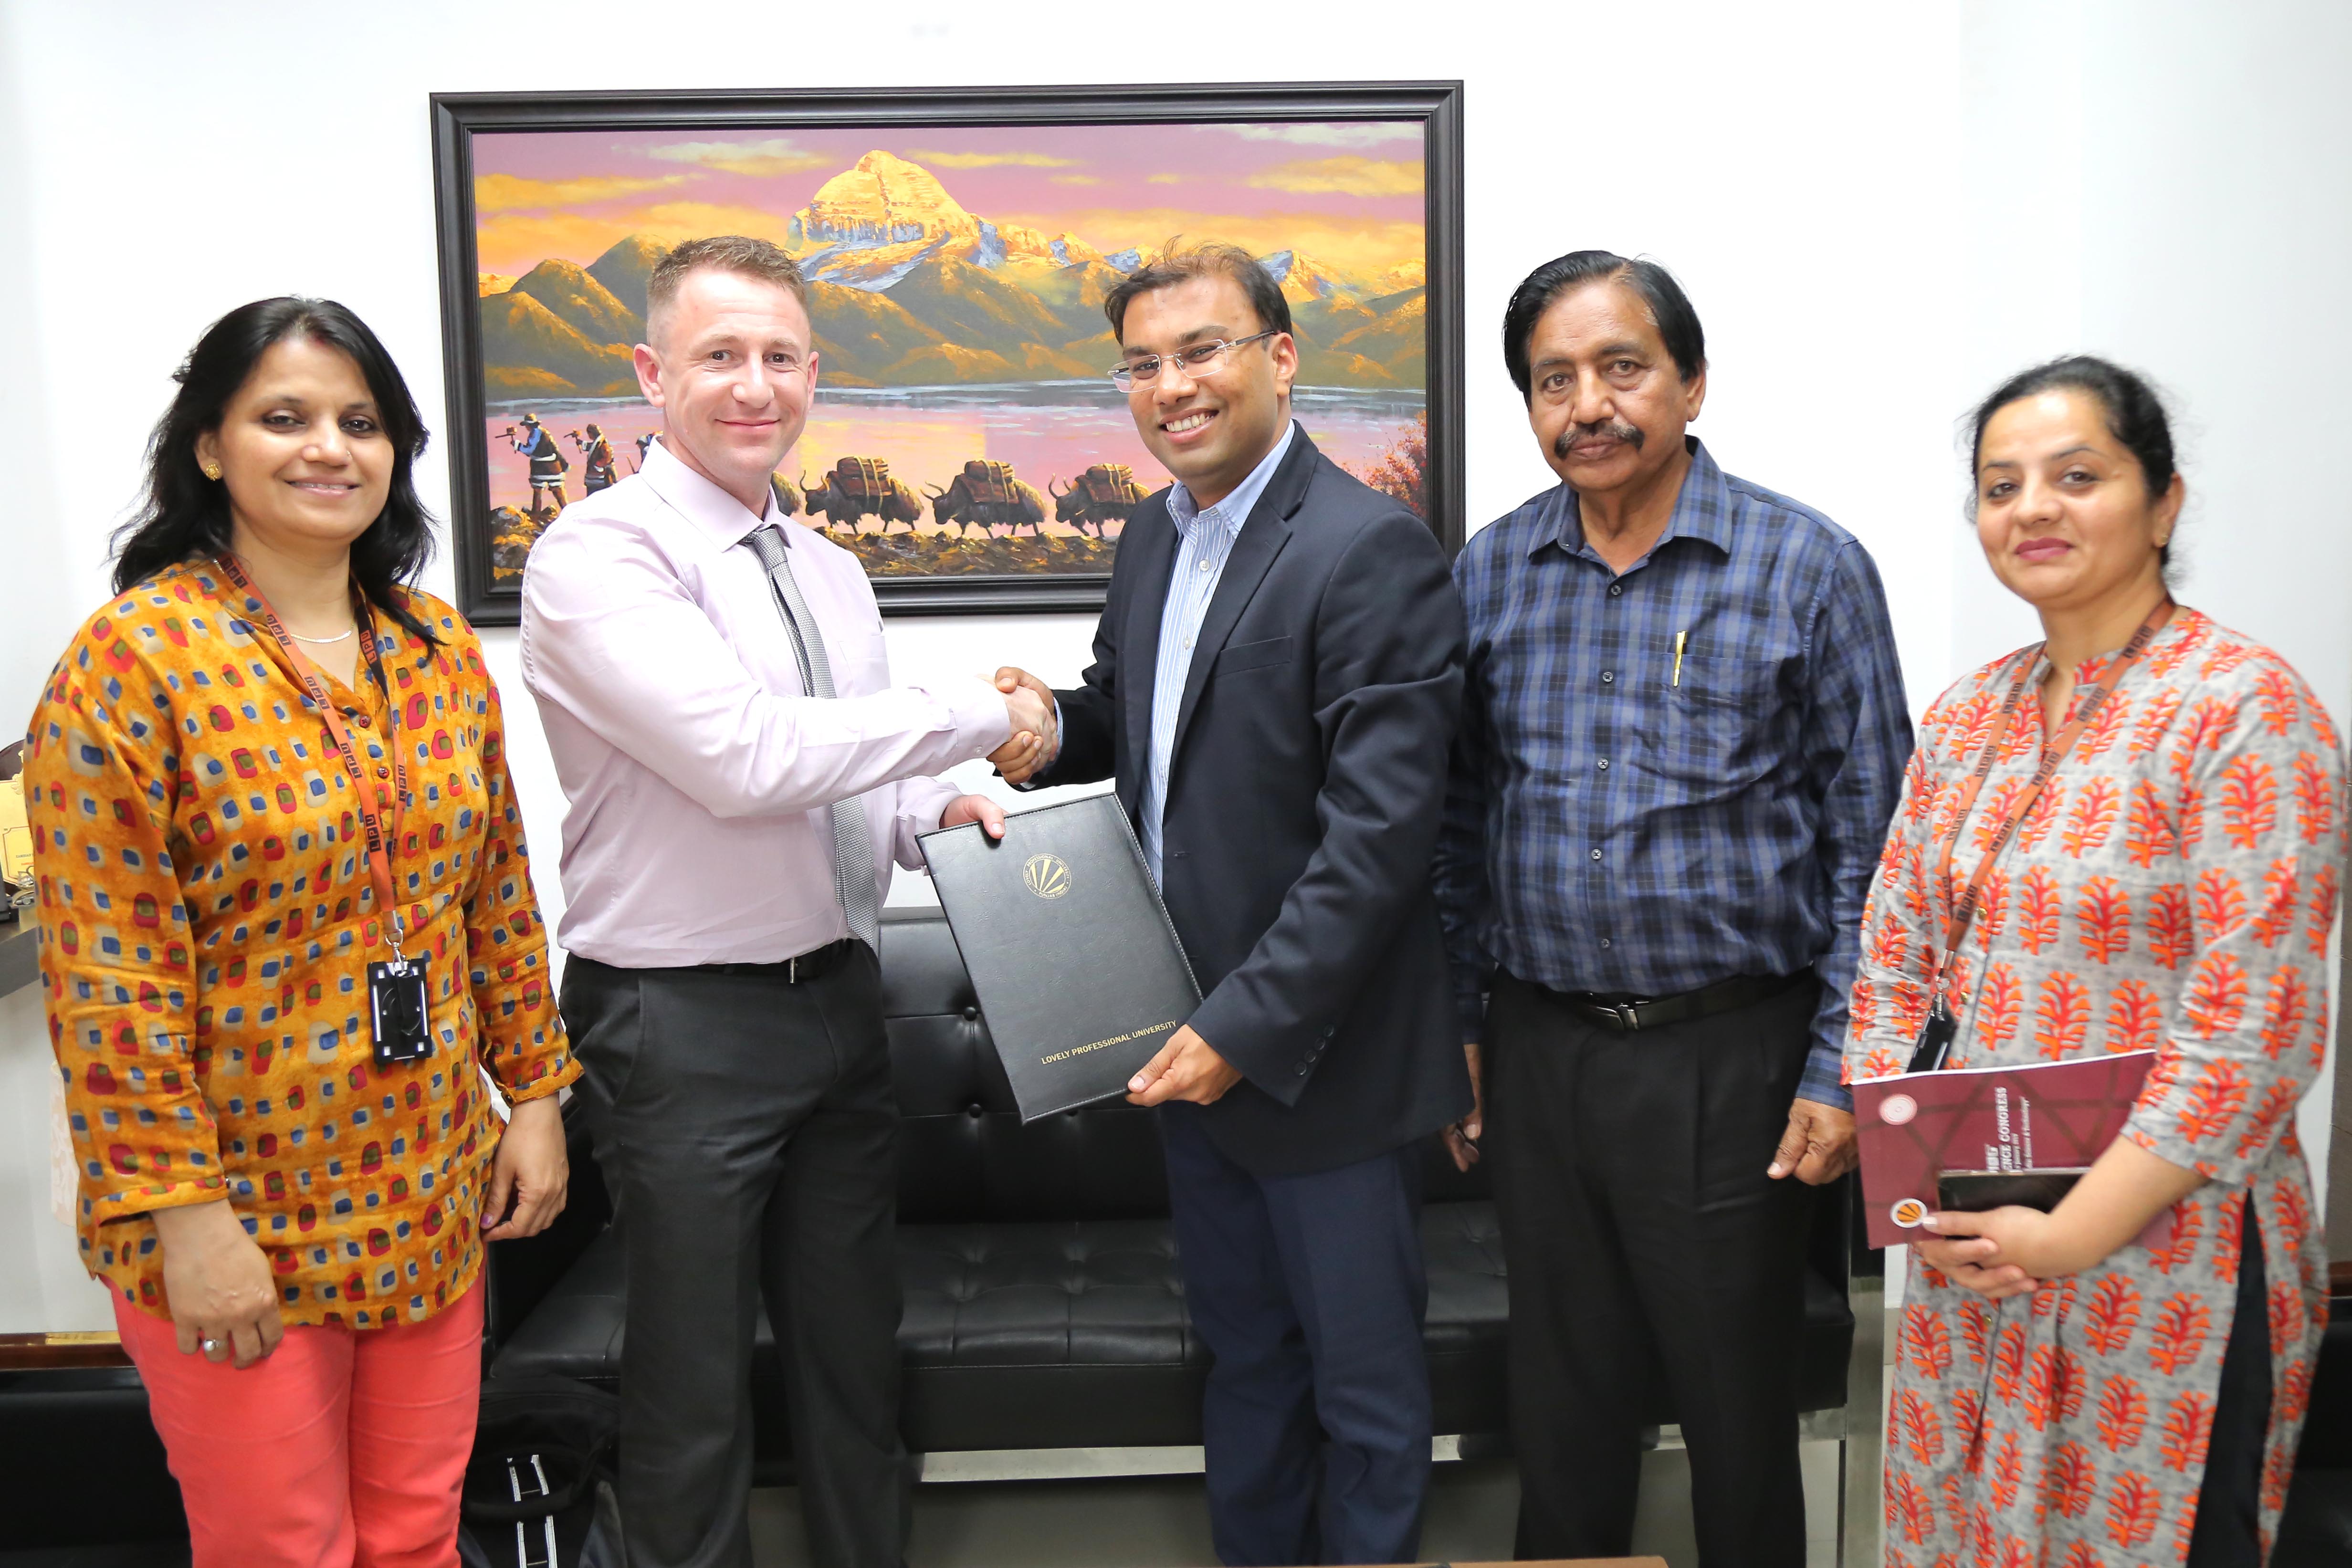 Prof Simon Dawson and LPU Director Mr Aman Mittal expressing happiness after signing of MoU at LPU Campus